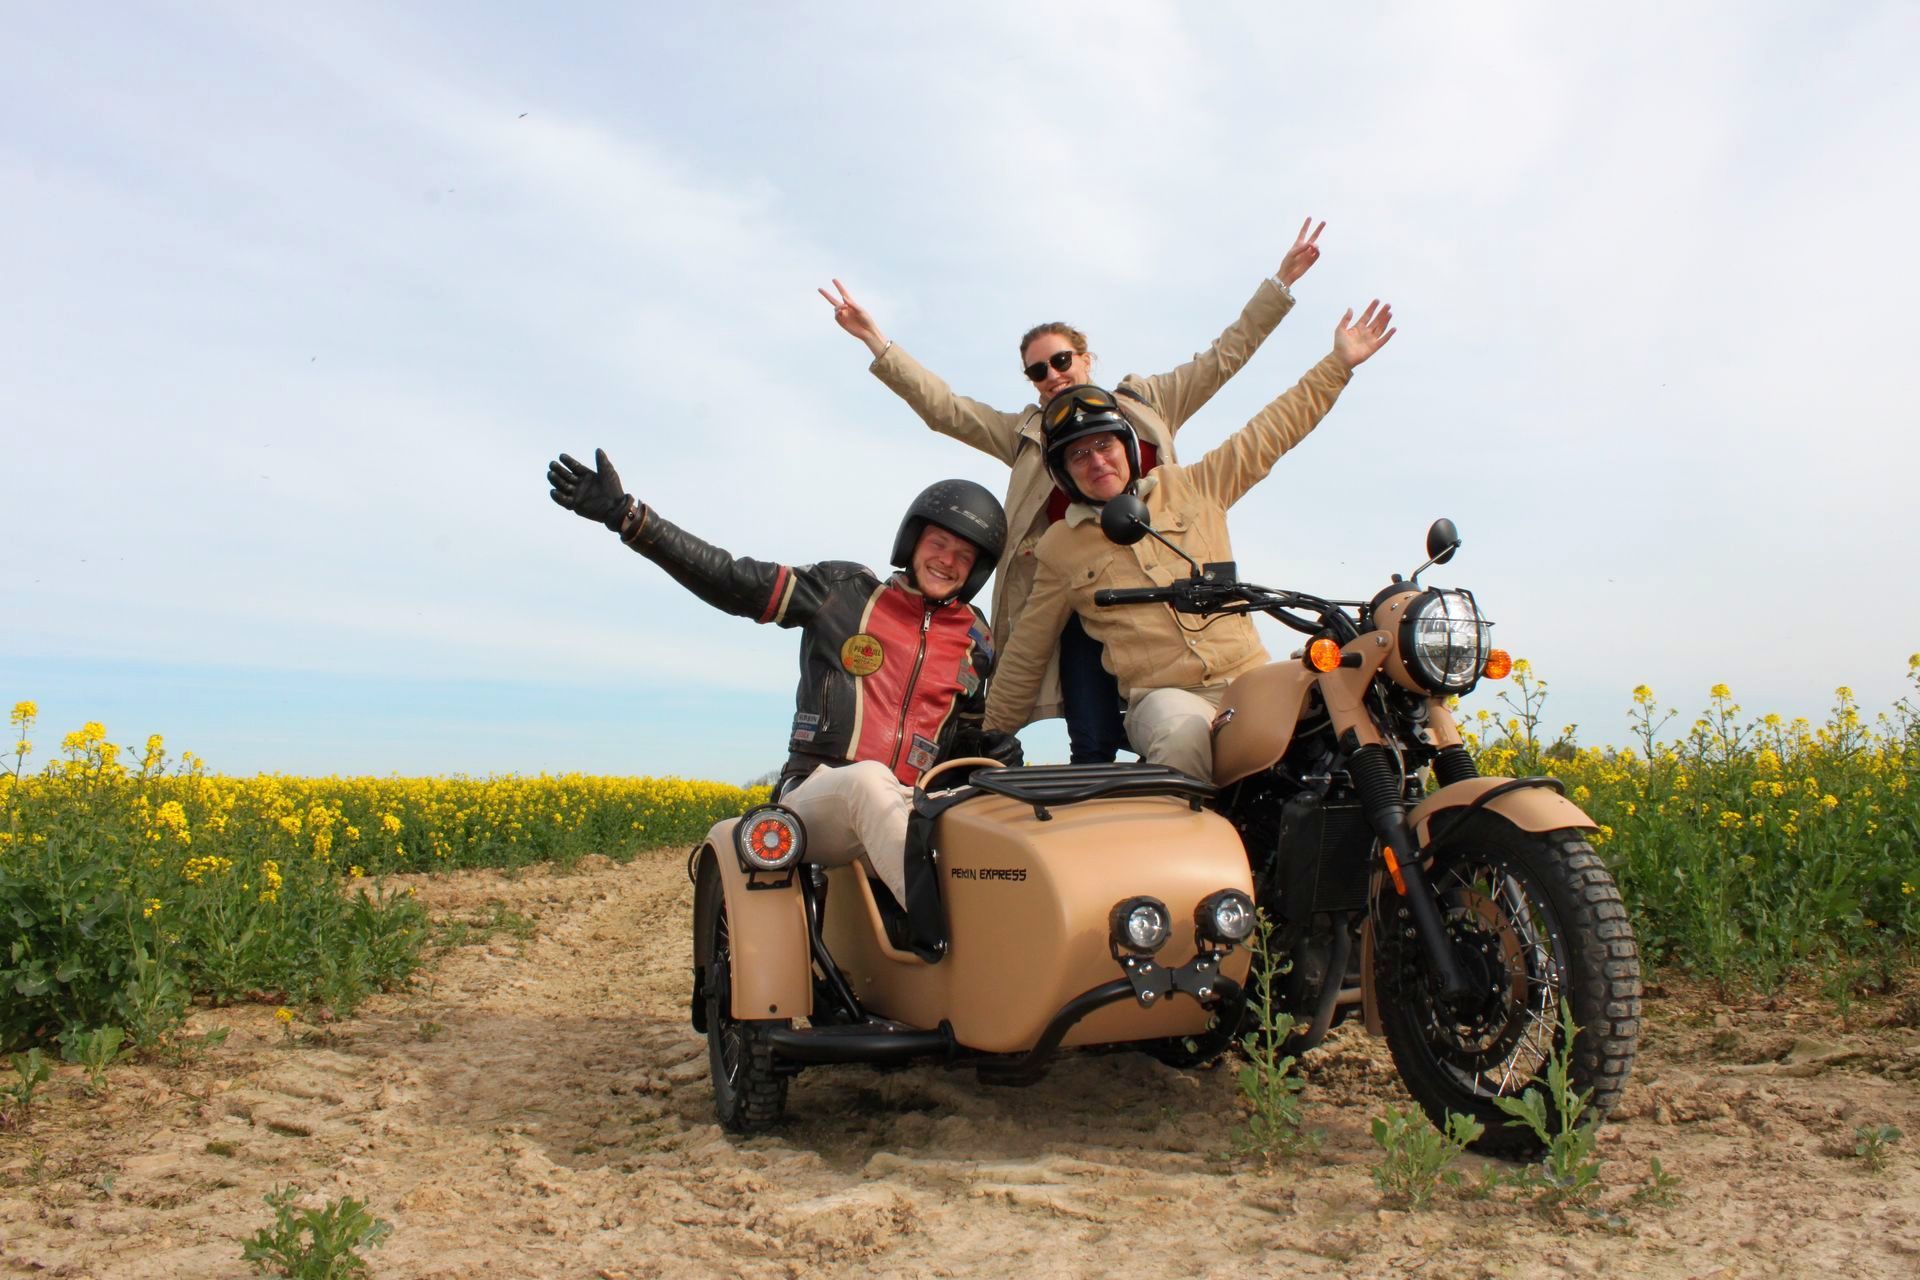 normandy motorcycle tours